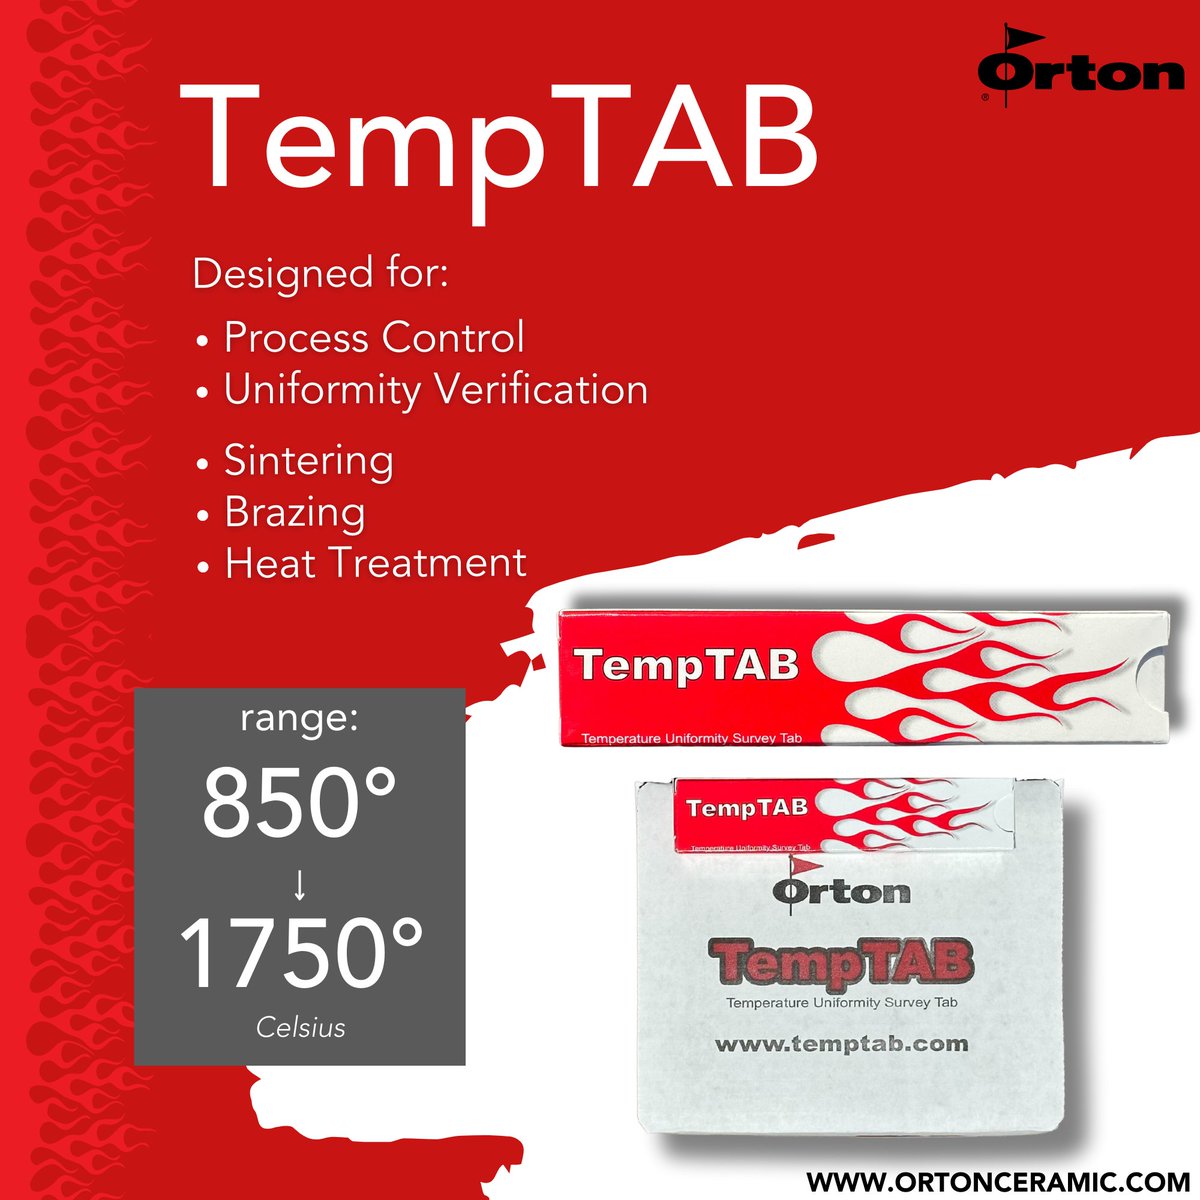 Orton's TempTABs were designed with Process Control in mind. Our TempTABs are easily deployed with verifiable, accurate results every time. If your working with high temperatures, you need TempTAB. #steelmaking #dentalporcerlain #industrialengineering #hightemperature #firing